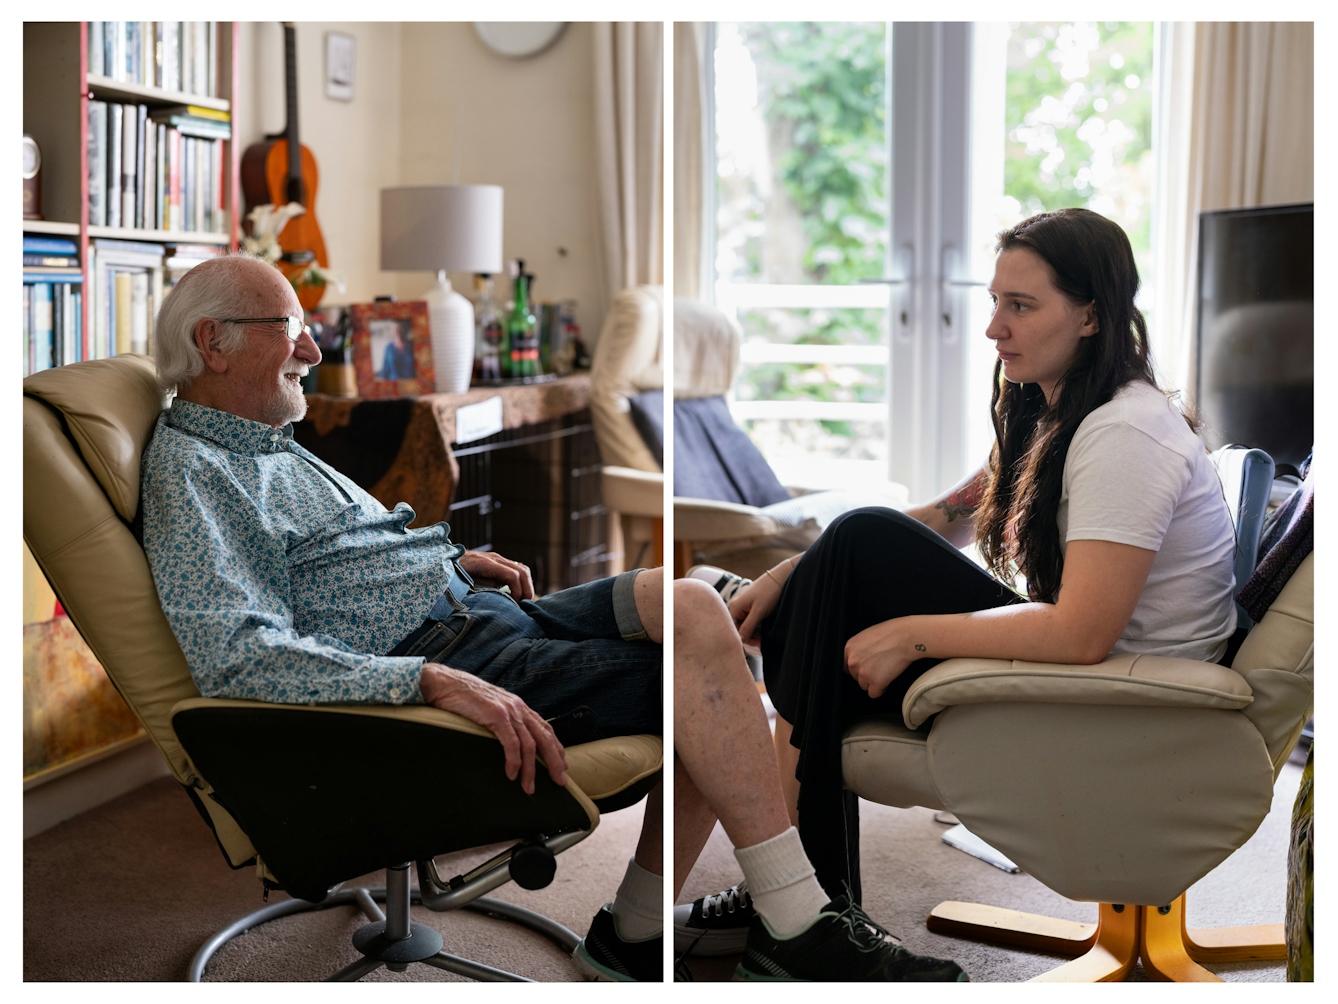 Two photographs next to each other forming a diptych of two people in a living room, sat on armchairs they are facing each other. On the left is an elderly man wearing glasses with white hair and a white goatee beard. On the right is a young woman with long dark hair. She is wearing a white t-shirt and a long dark skirt.